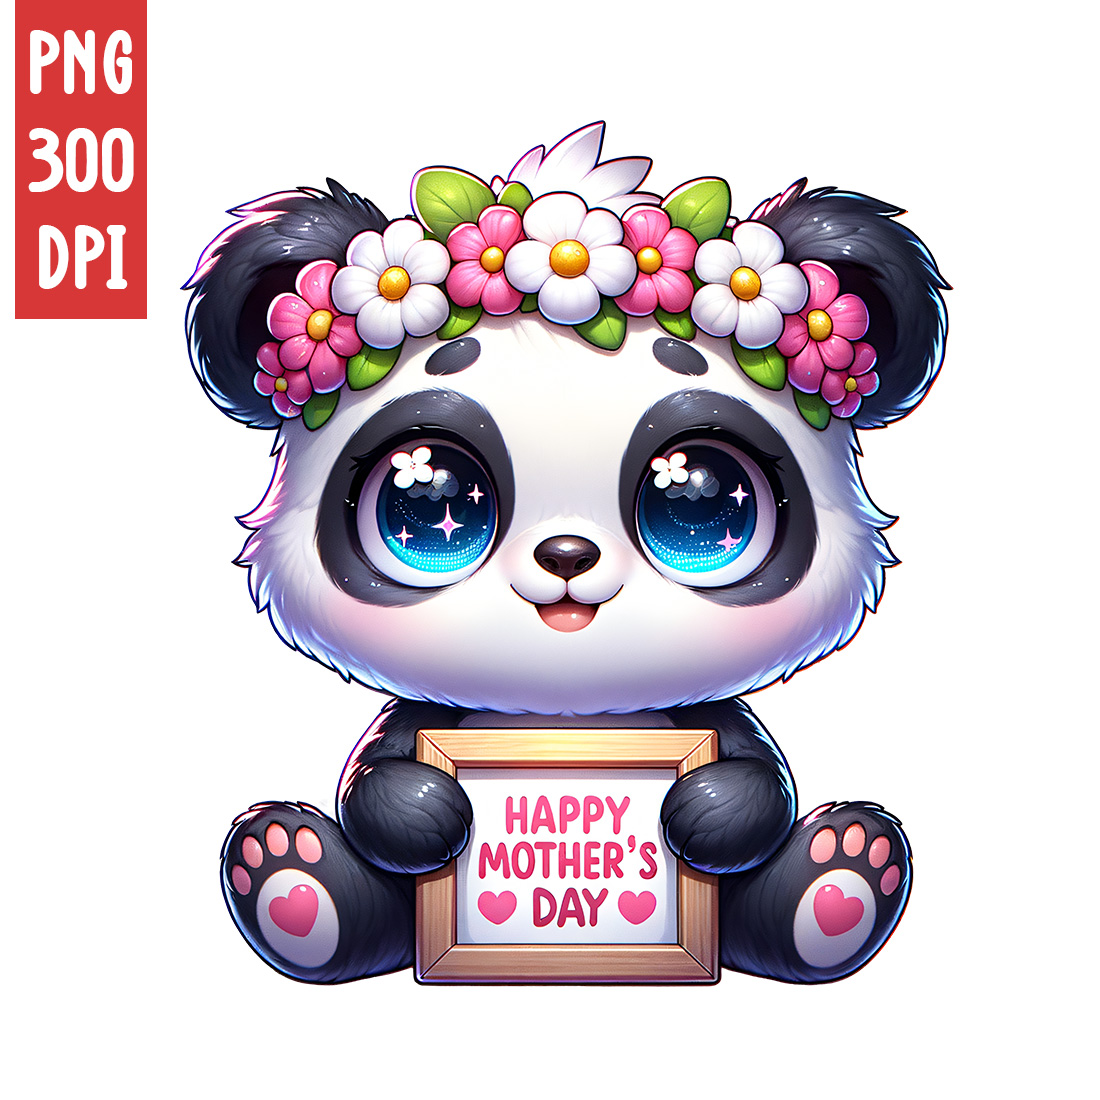 Mother's Day Animal Clipart | Cute Panda with frame clipart | PNG preview image.